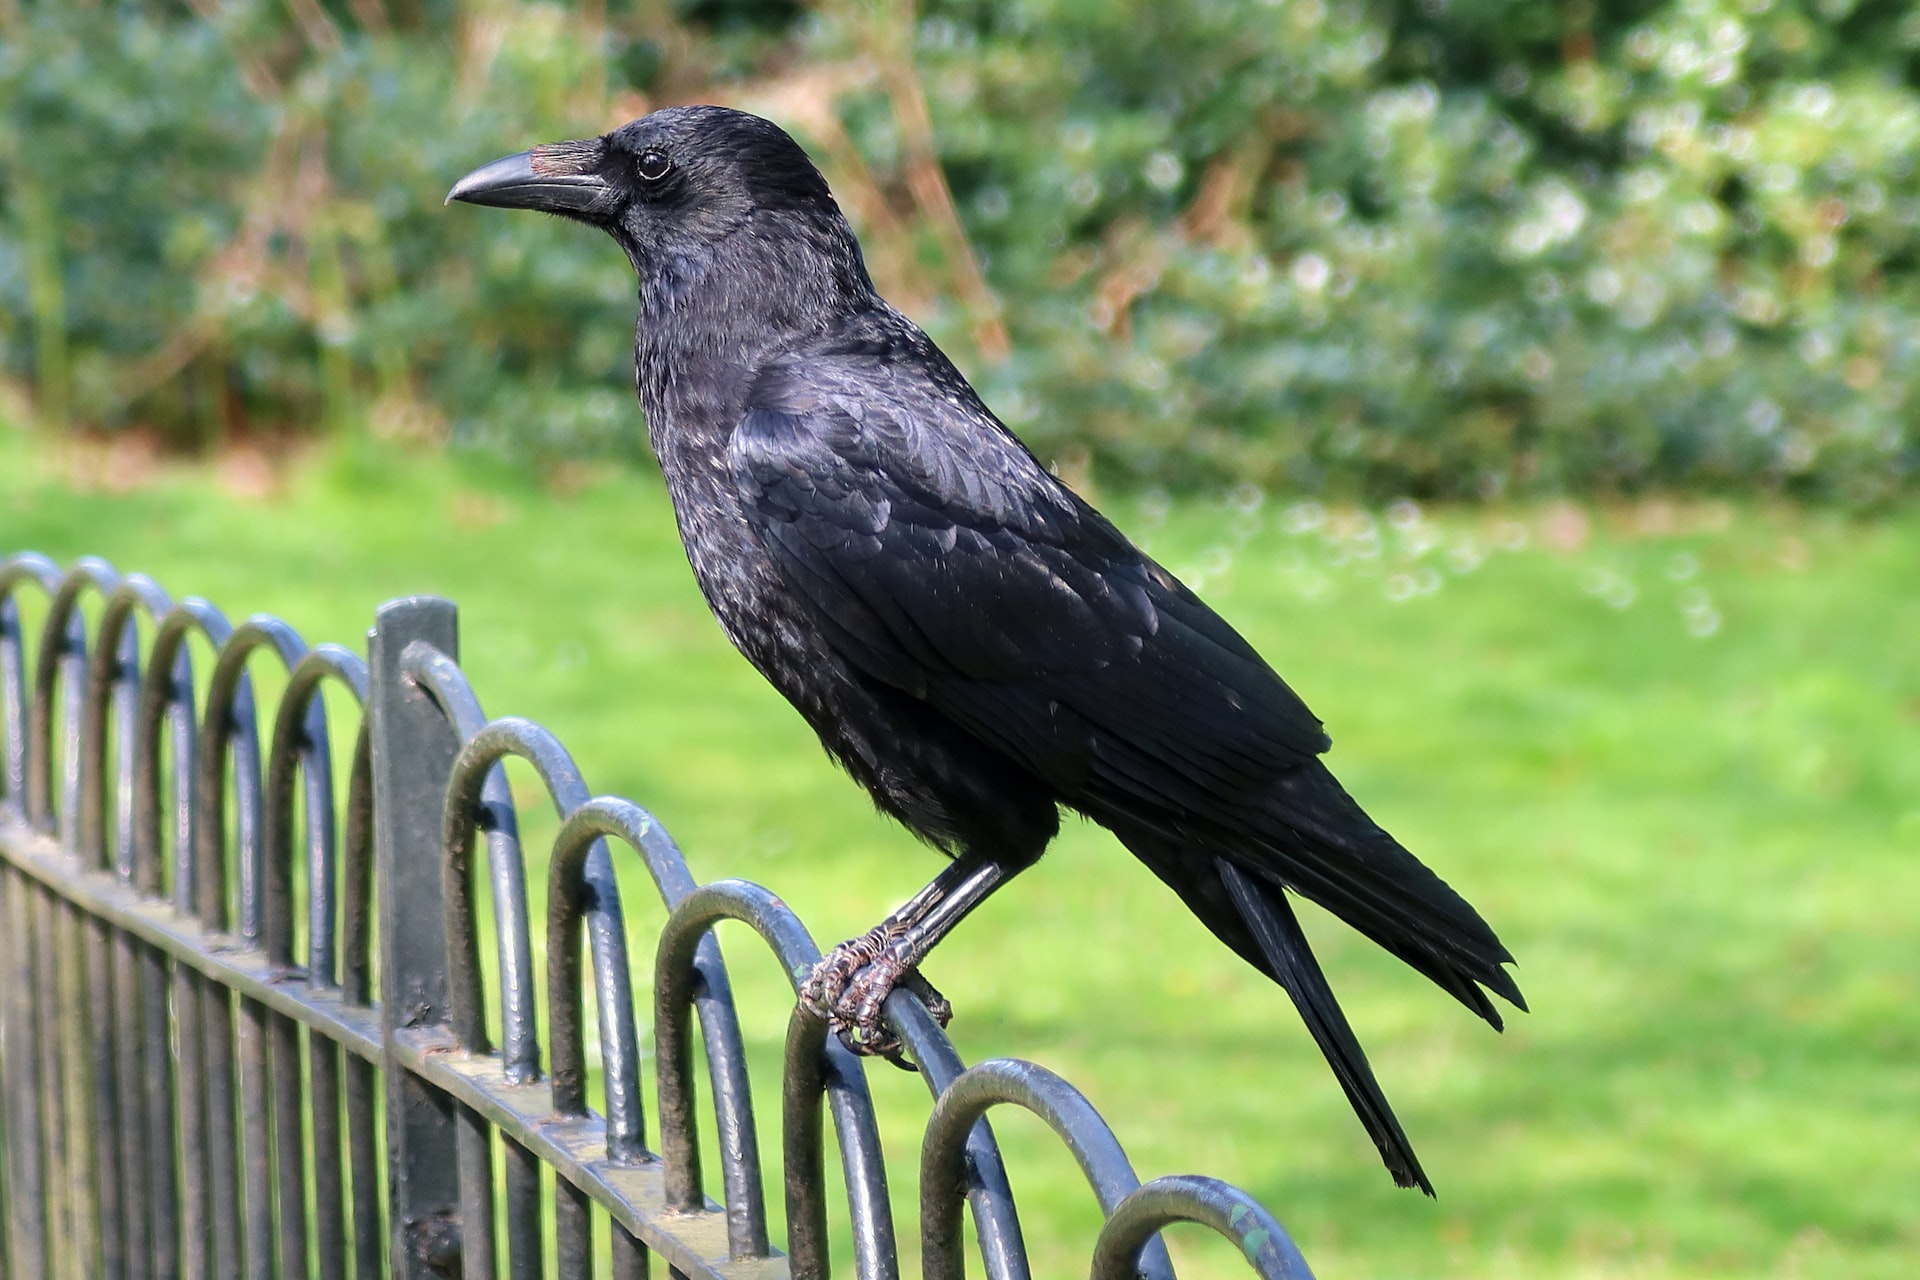 A black crow sitting on an iron fence